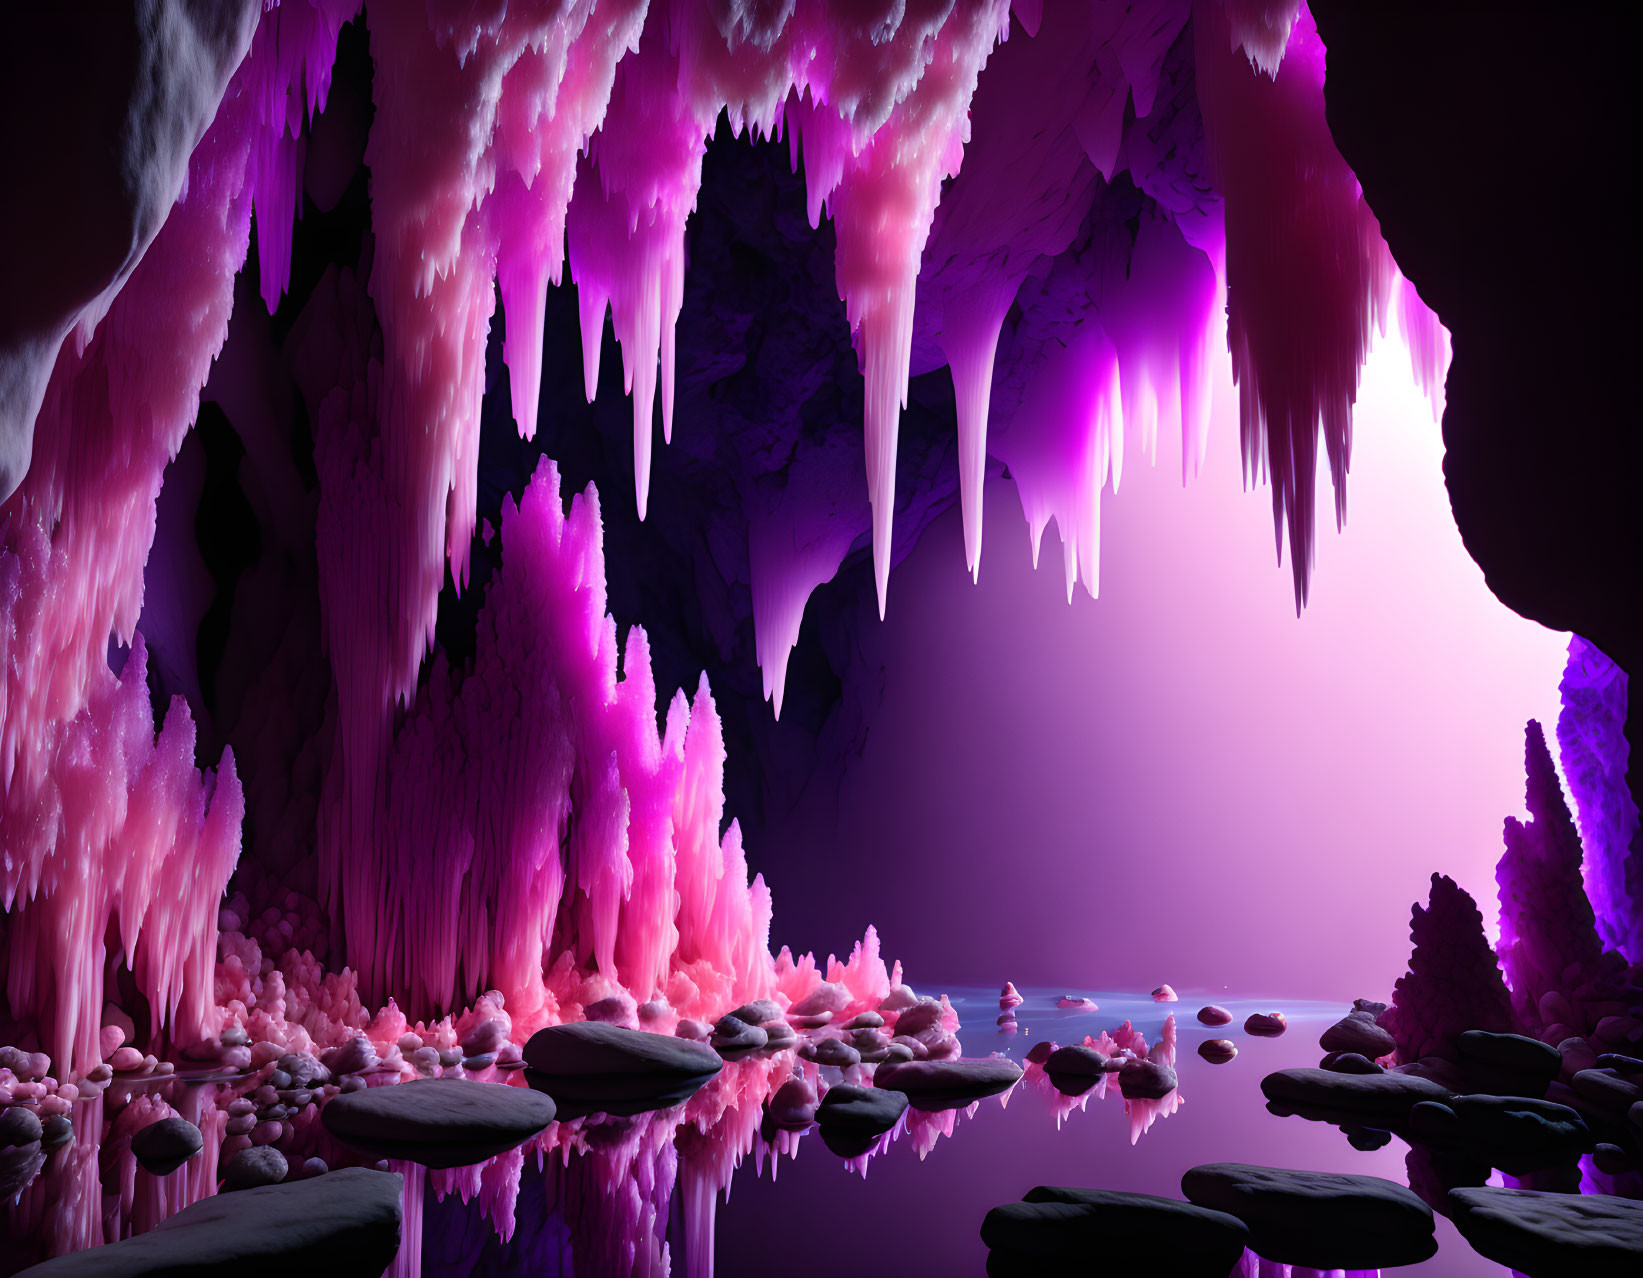 Vibrant purple and pink cave with stalactites, stalagmites, water, rocks